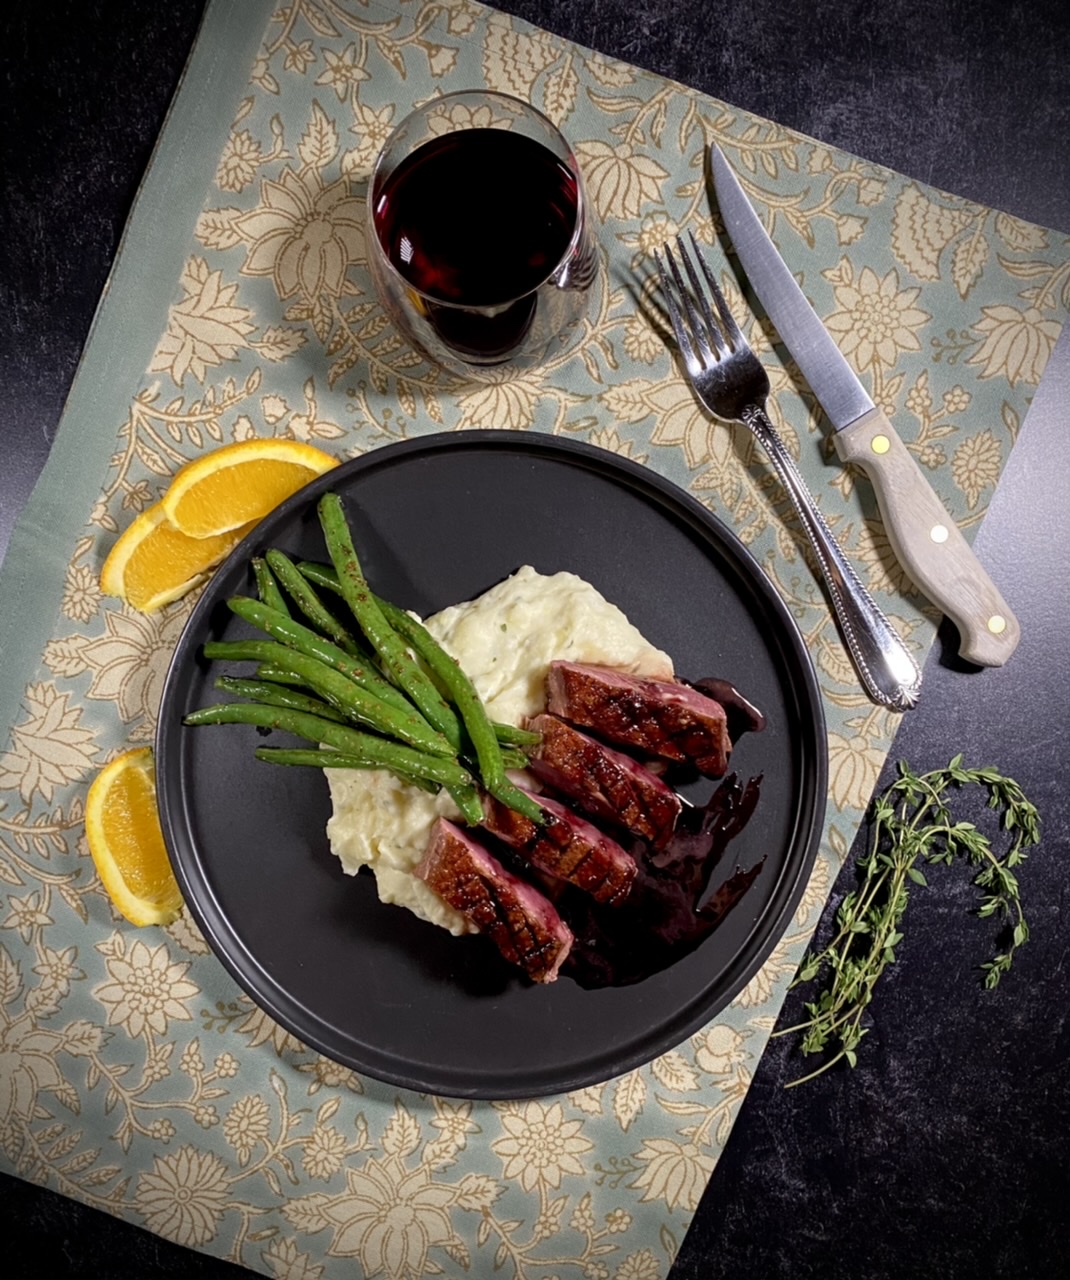 FC308F02 991C 483B 8C98 1F427928ED87 - Seared Duck Breast with Reduced Pomegranate Sauce